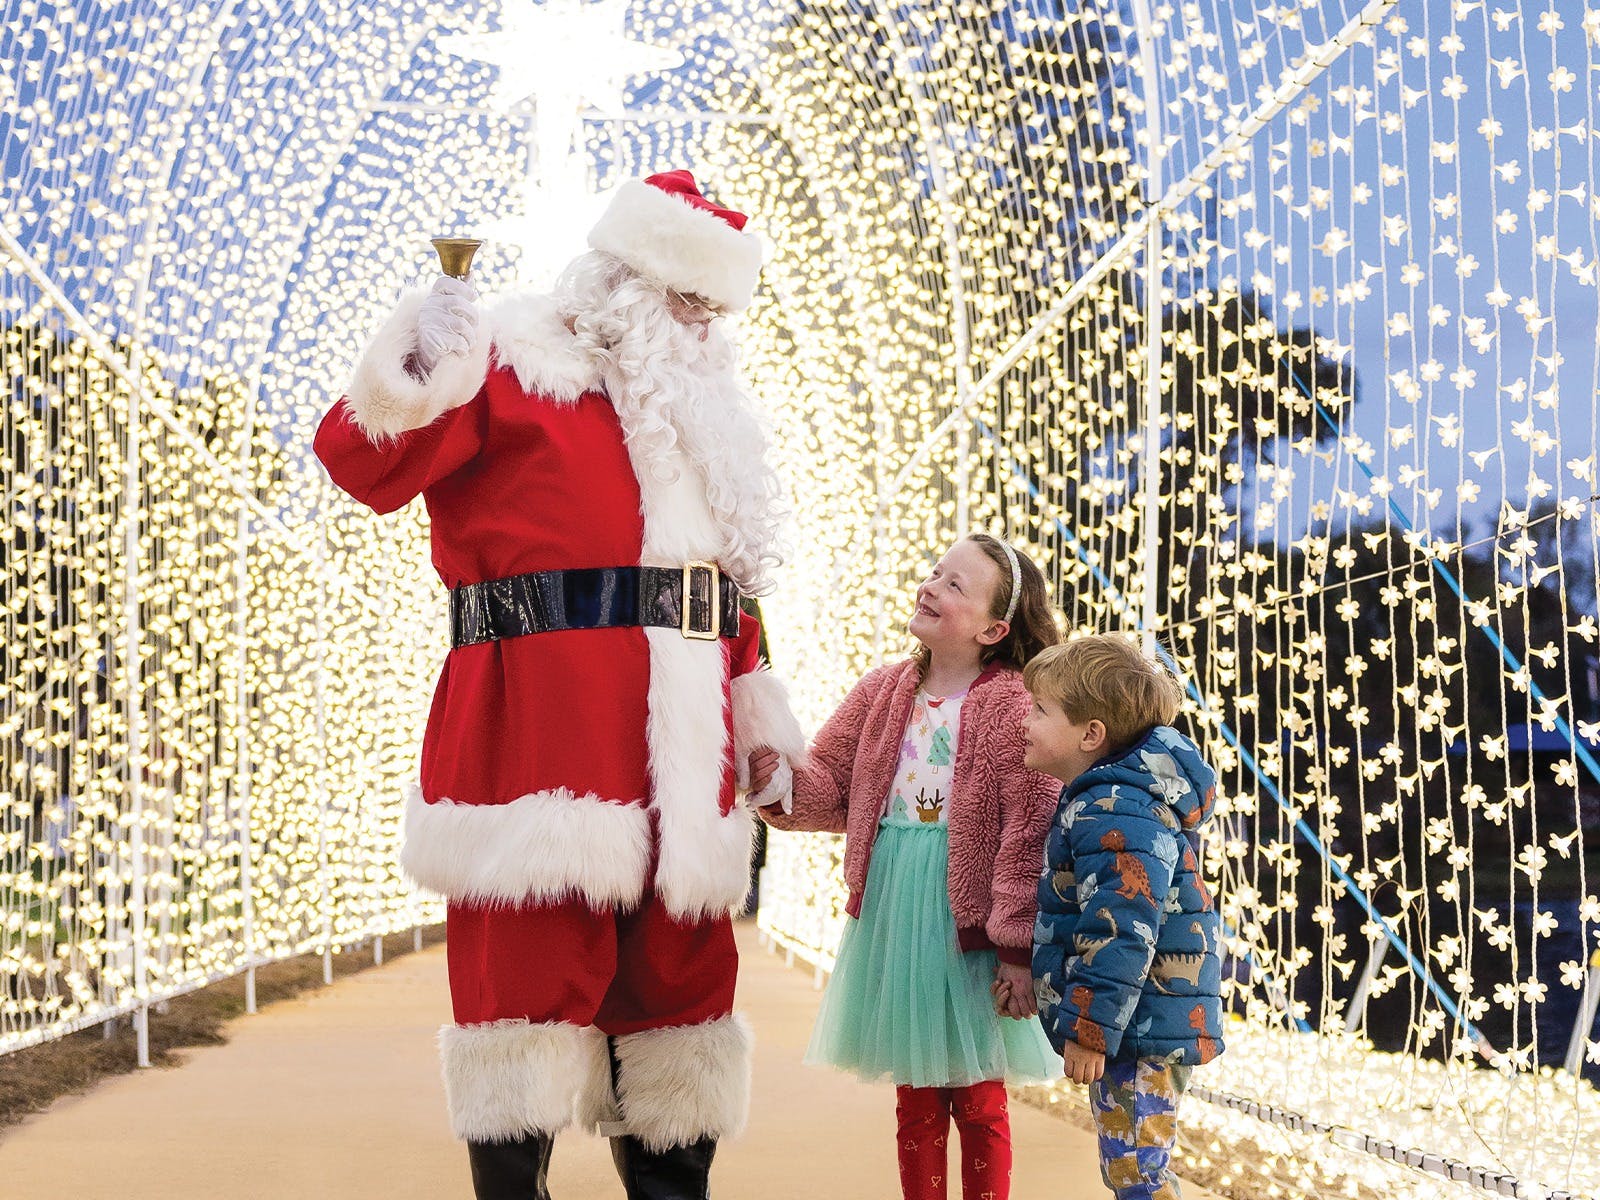 10 family-friendly Christmas activities to enjoy